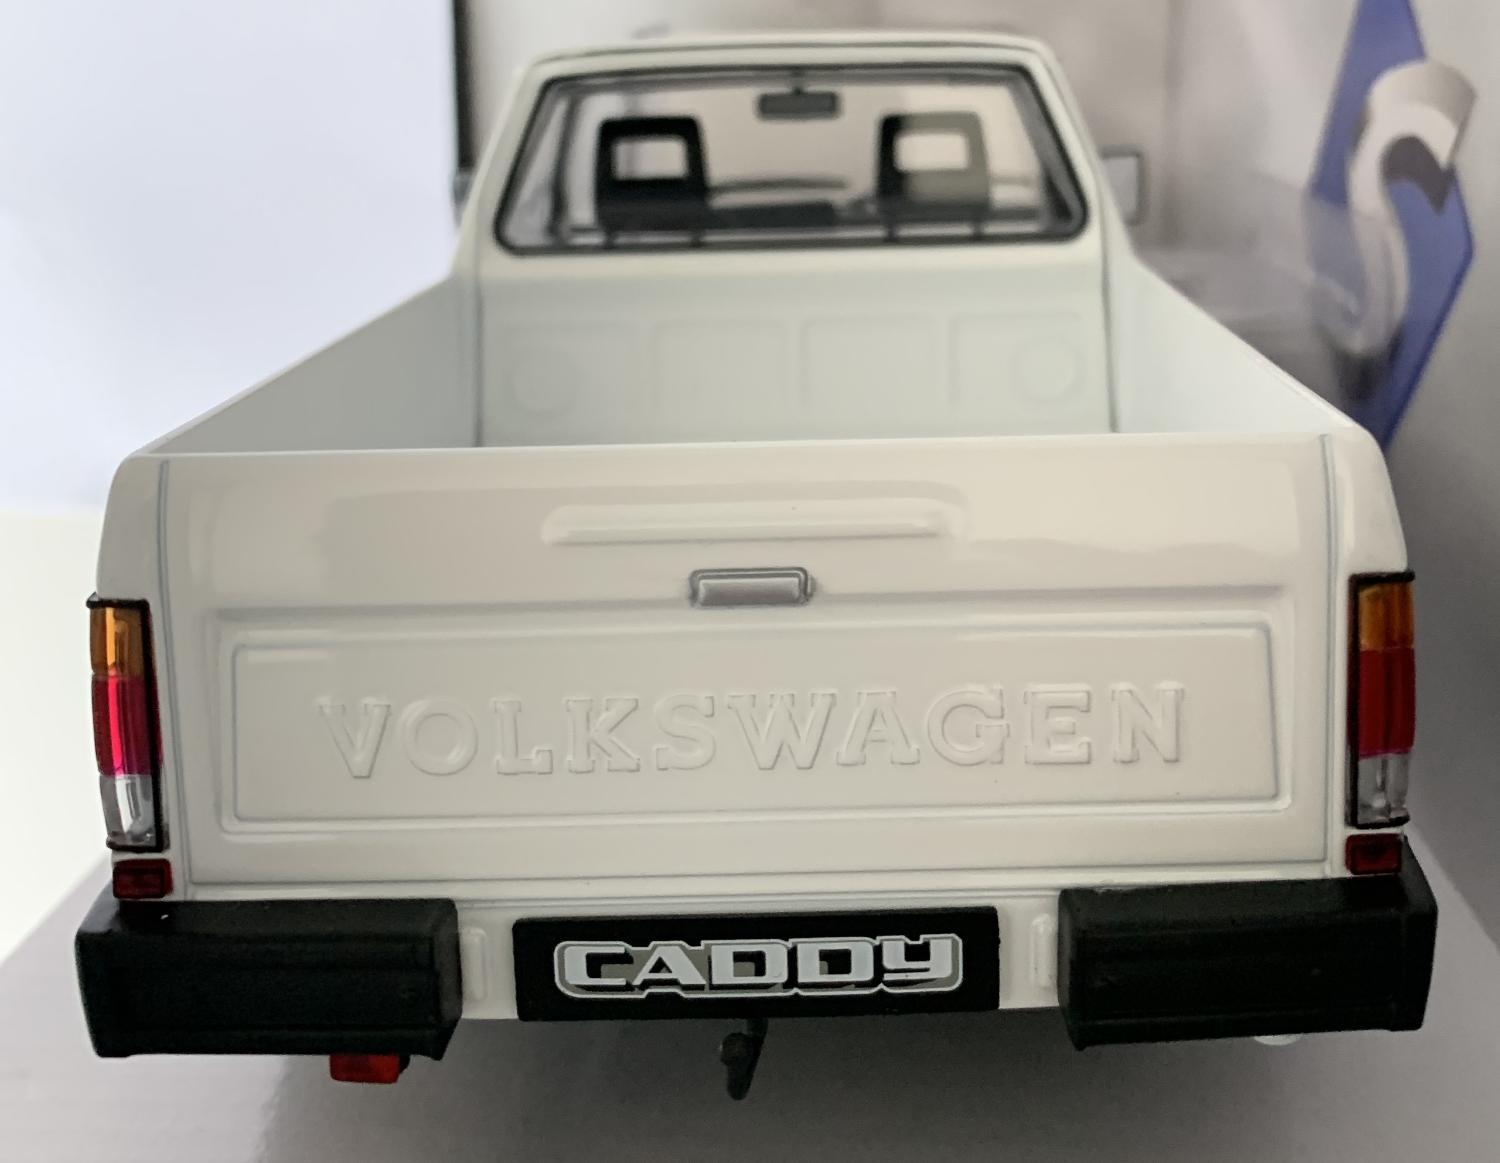 A very good representation of the VW Caddy pick up mk1 decorated in white with black trims and silver wheels